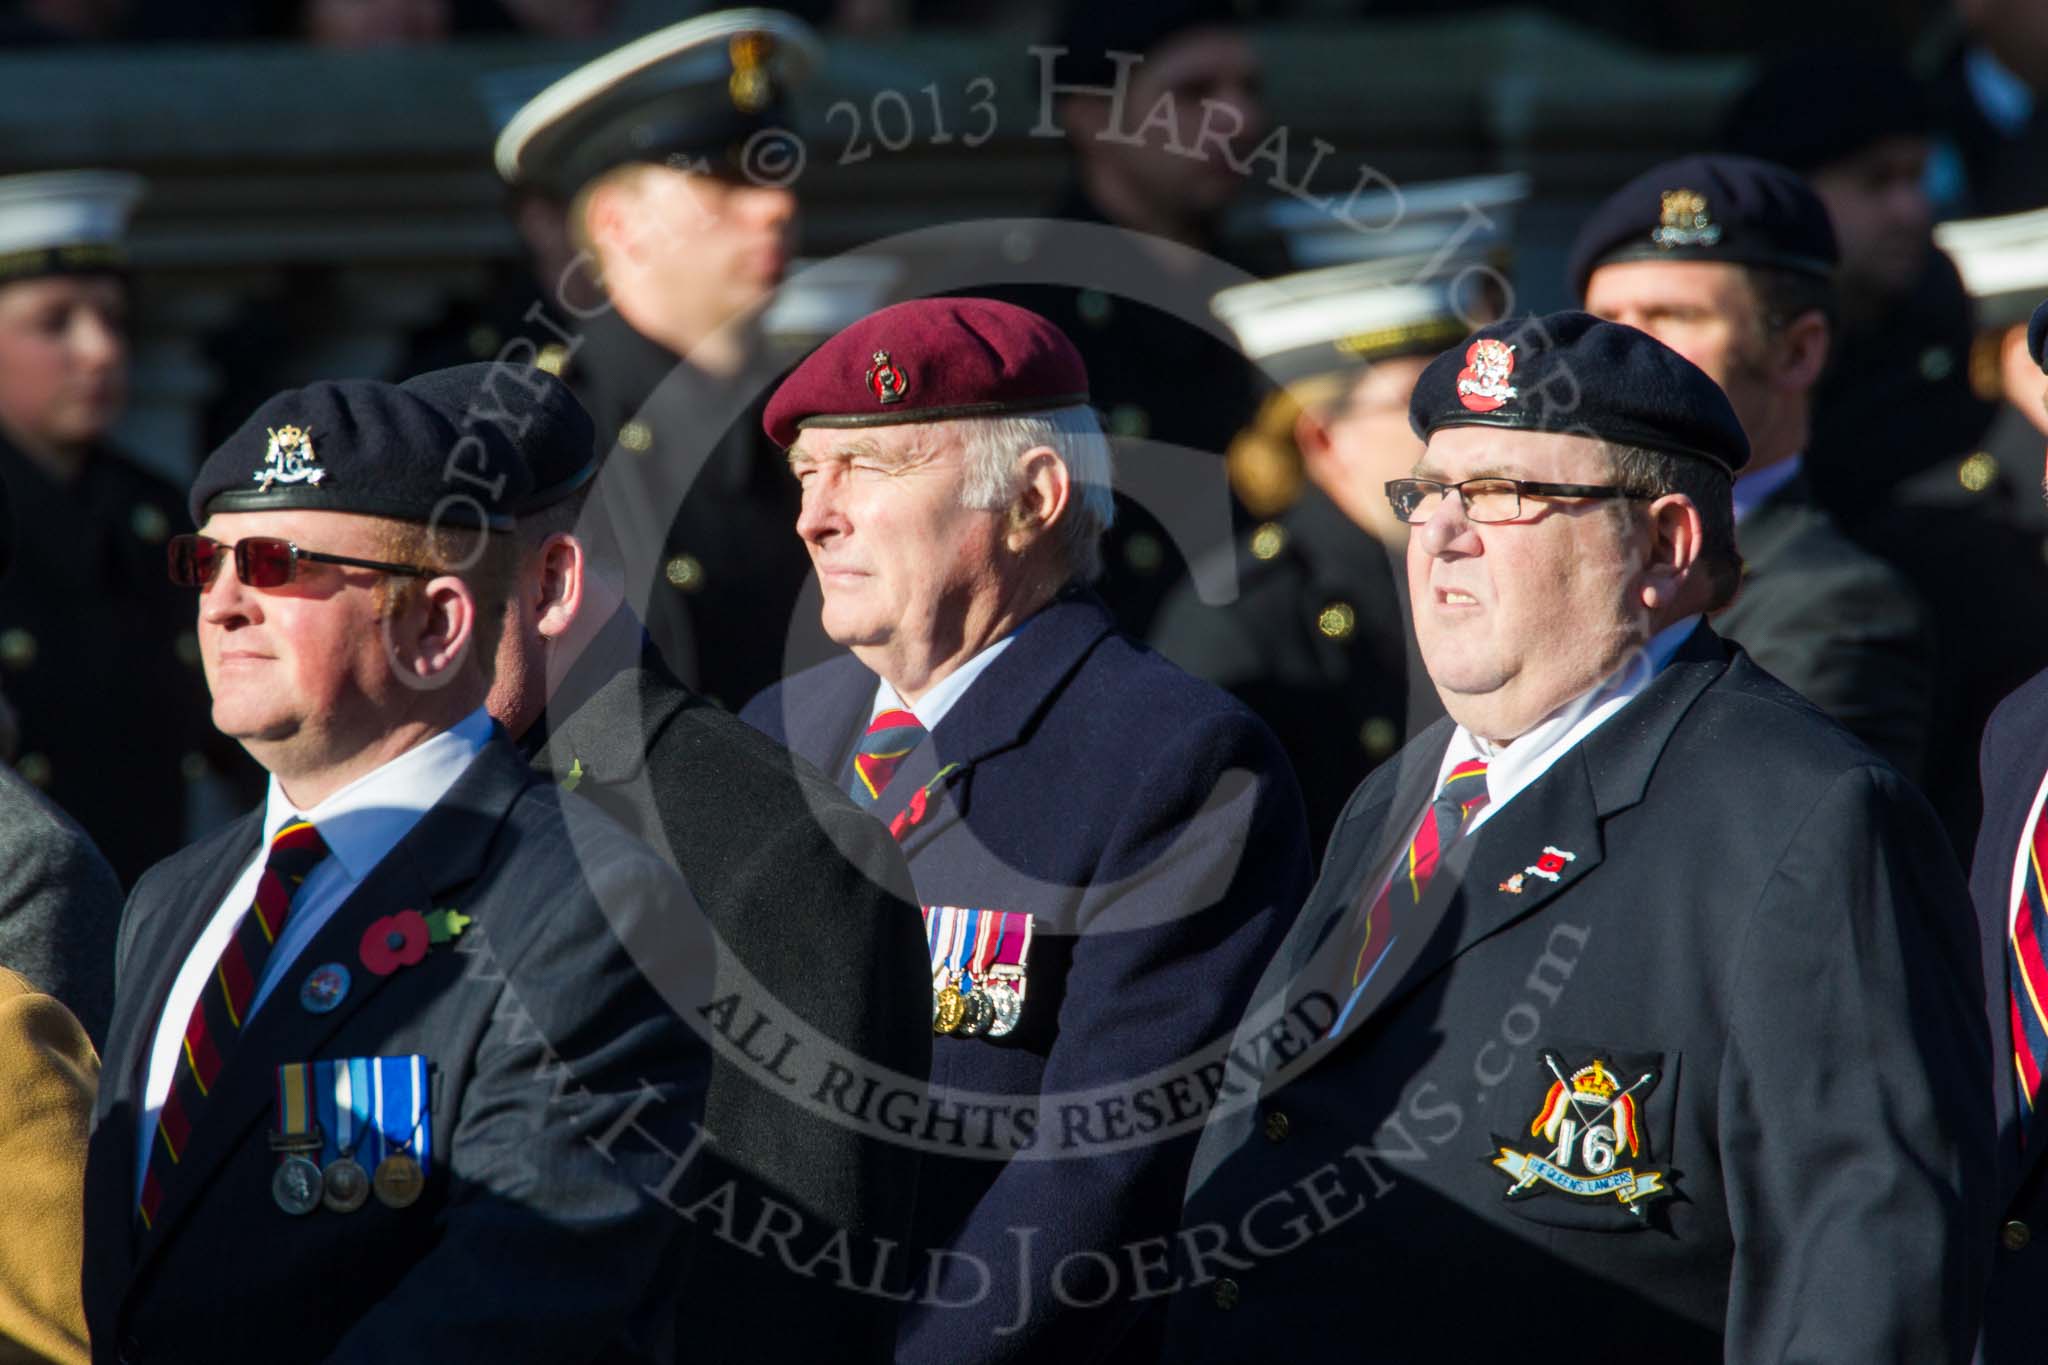 Remembrance Sunday at the Cenotaph in London 2014: Group B30 - 16/5th Queen's Royal Lancers.
Press stand opposite the Foreign Office building, Whitehall, London SW1,
London,
Greater London,
United Kingdom,
on 09 November 2014 at 12:13, image #1906